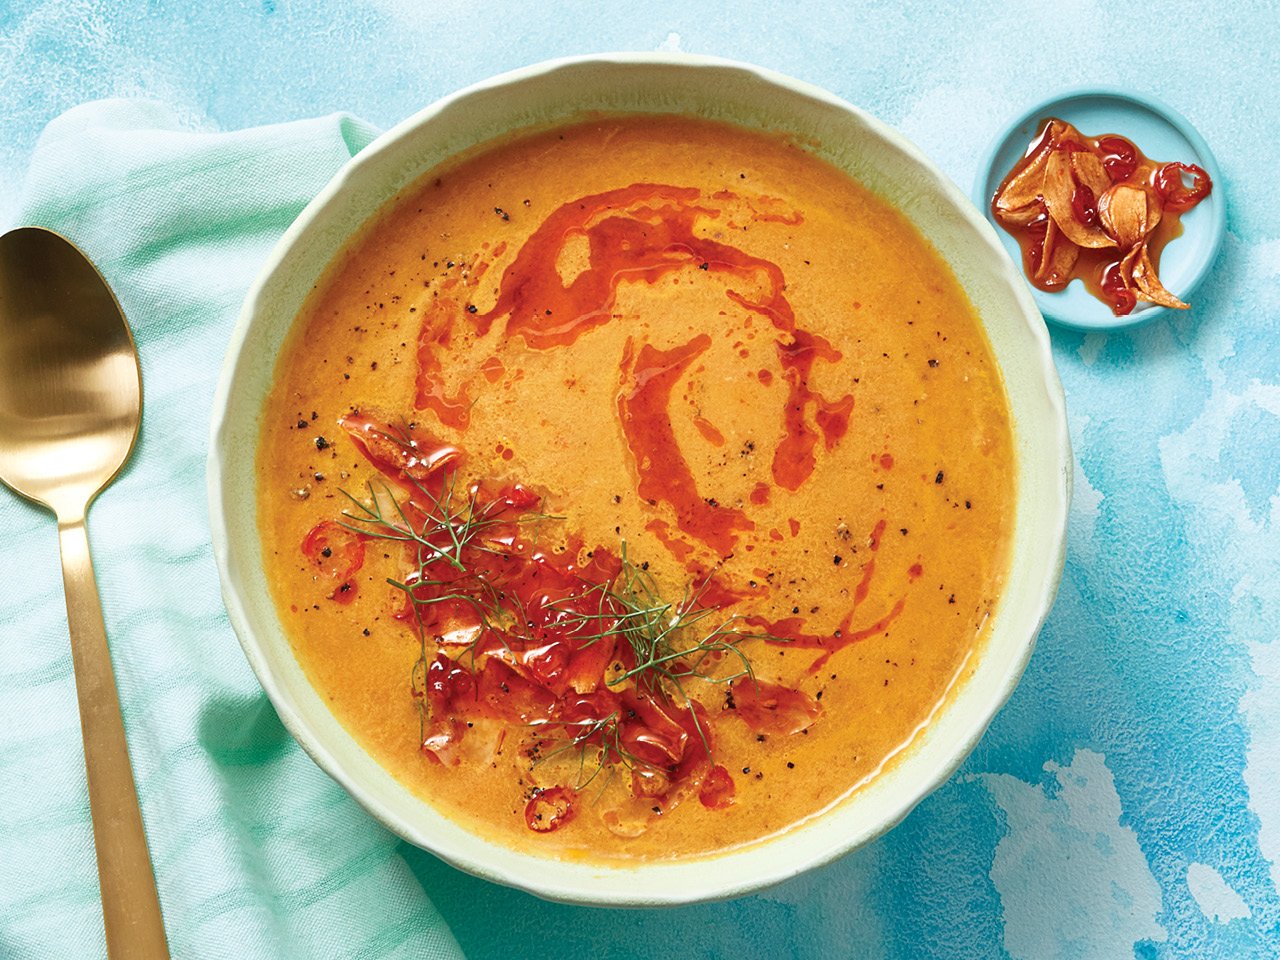 Carrot fennel soup with garlic chili oil on top in a light green bowl and a cloud printed background and a spoon to accompany.